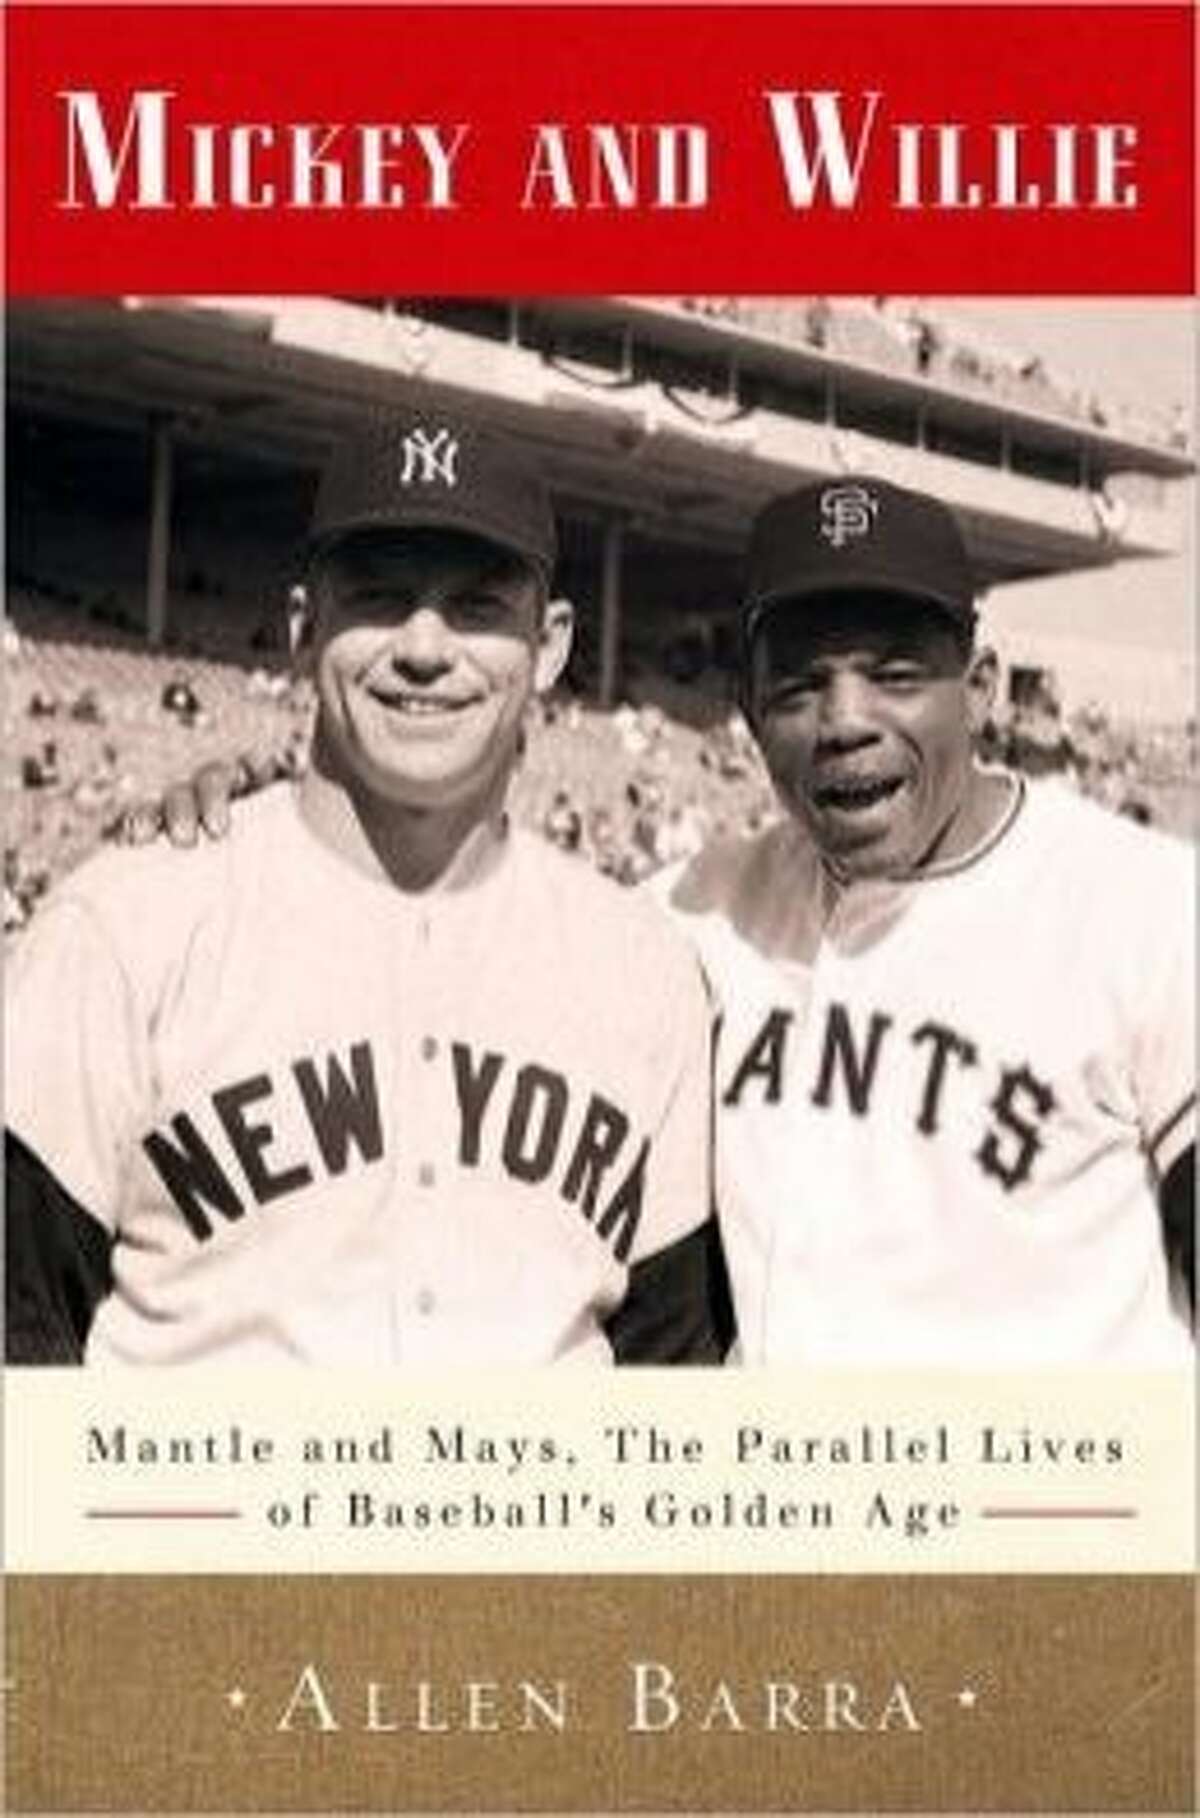 Mickey and Willie: Mantle and Mays, the Parallel Lives of Baseball's Golden Age, by Allen Barra